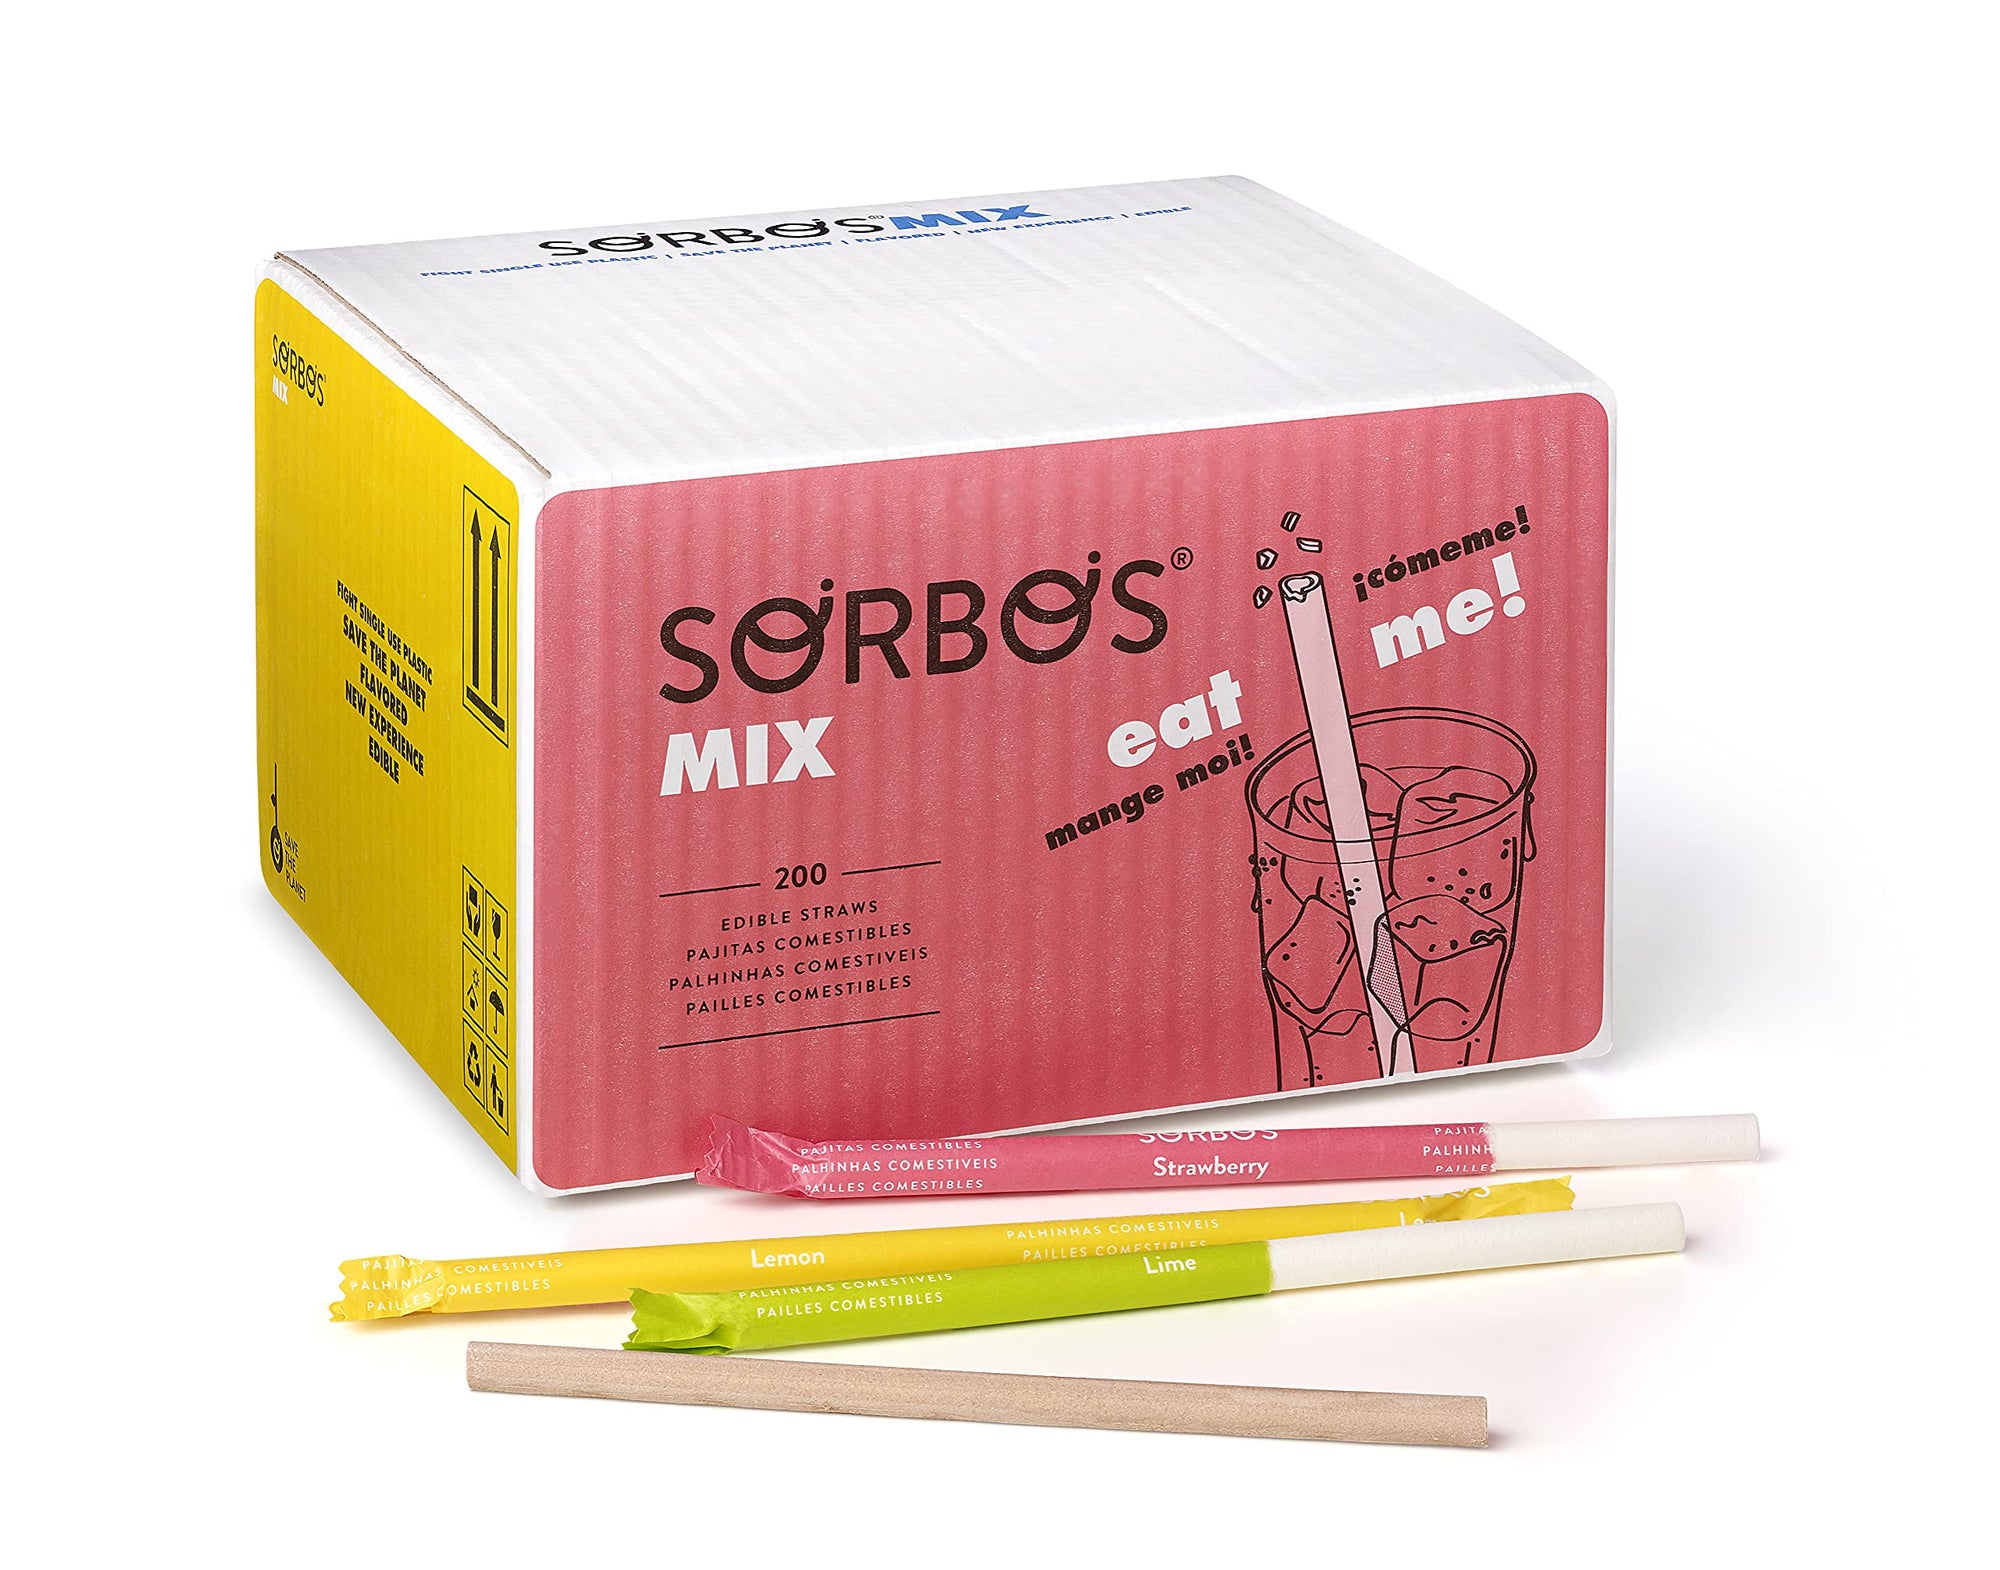 Sorbos Mixed Flavored Edible Sustainable Straws - Box of 200